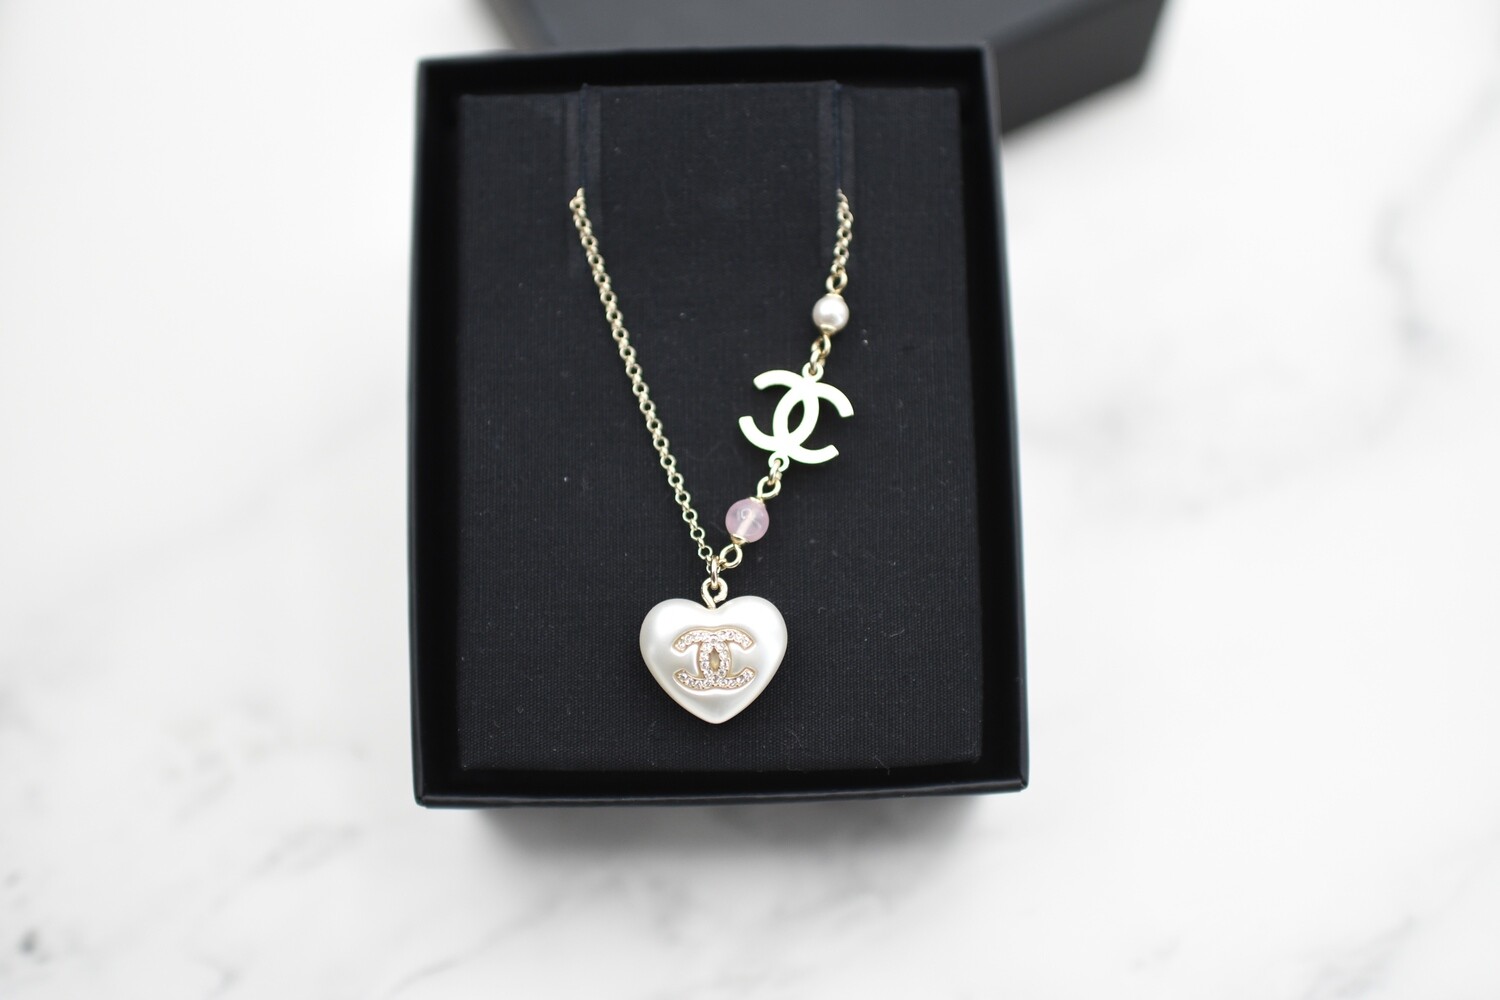 Chanel Necklace CC Heart, Gold Hardware with Crystals, New in Box GA001